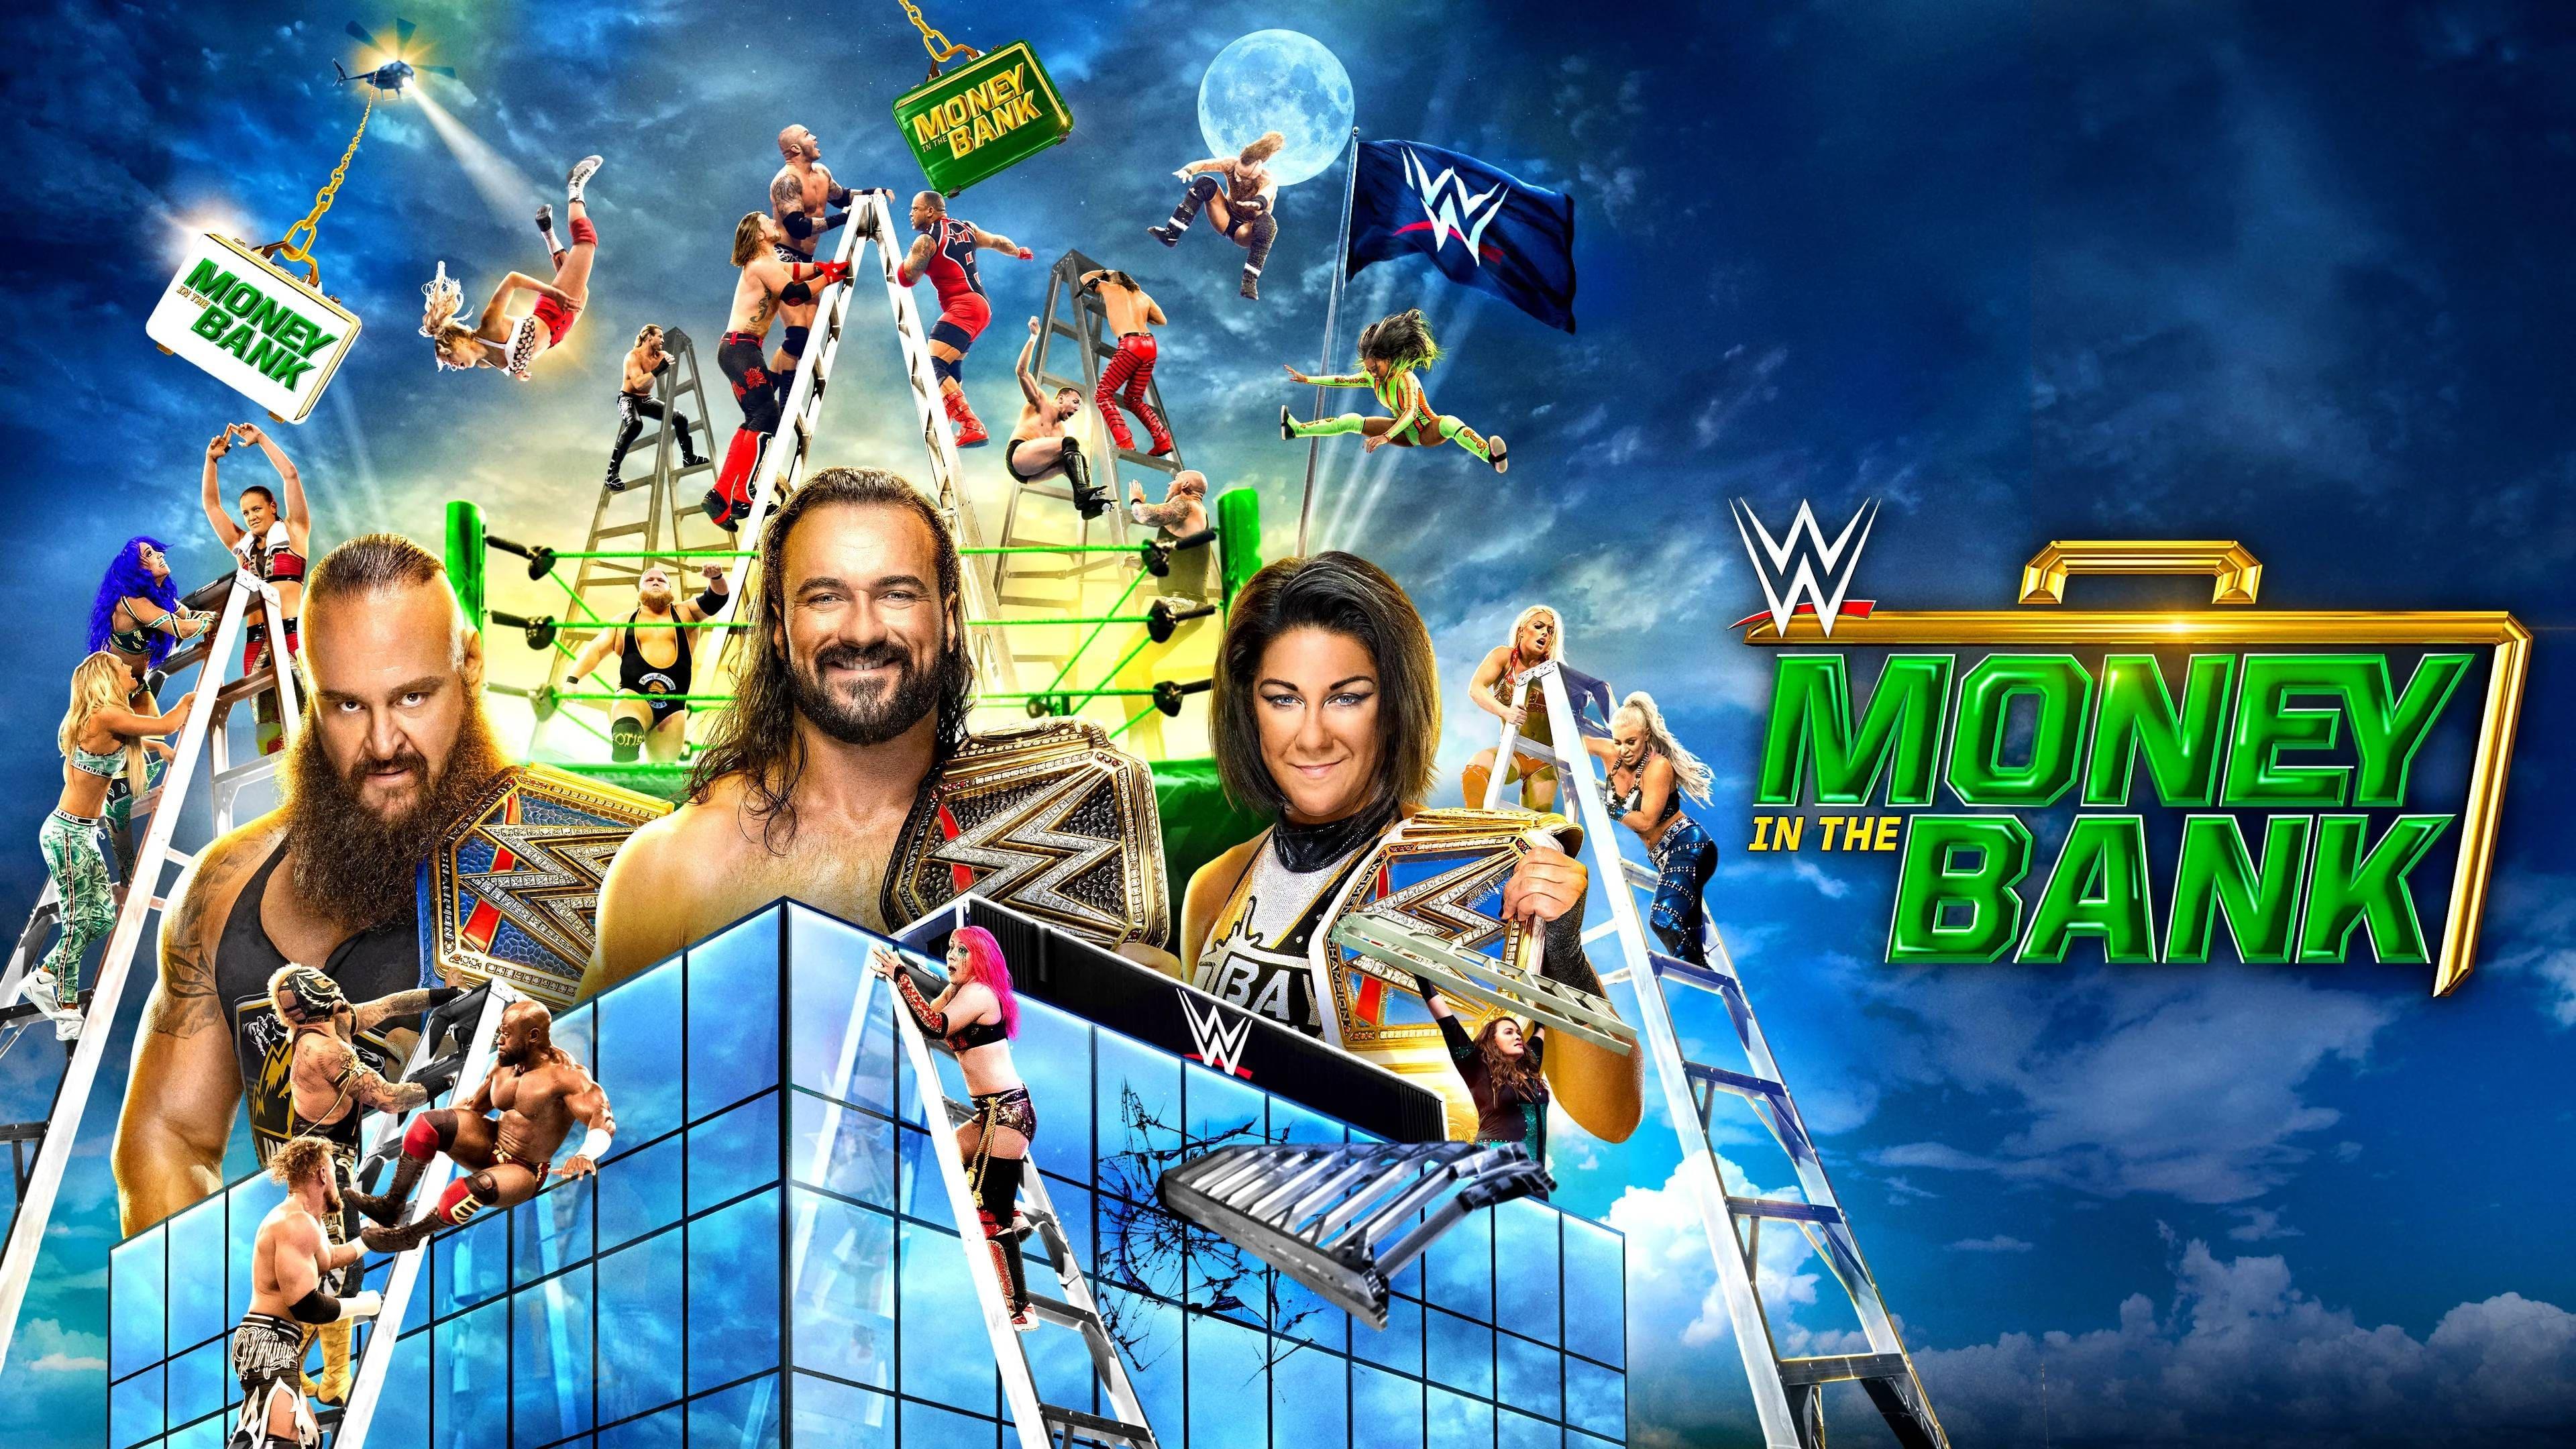 WWE Money in the Bank 2020 backdrop